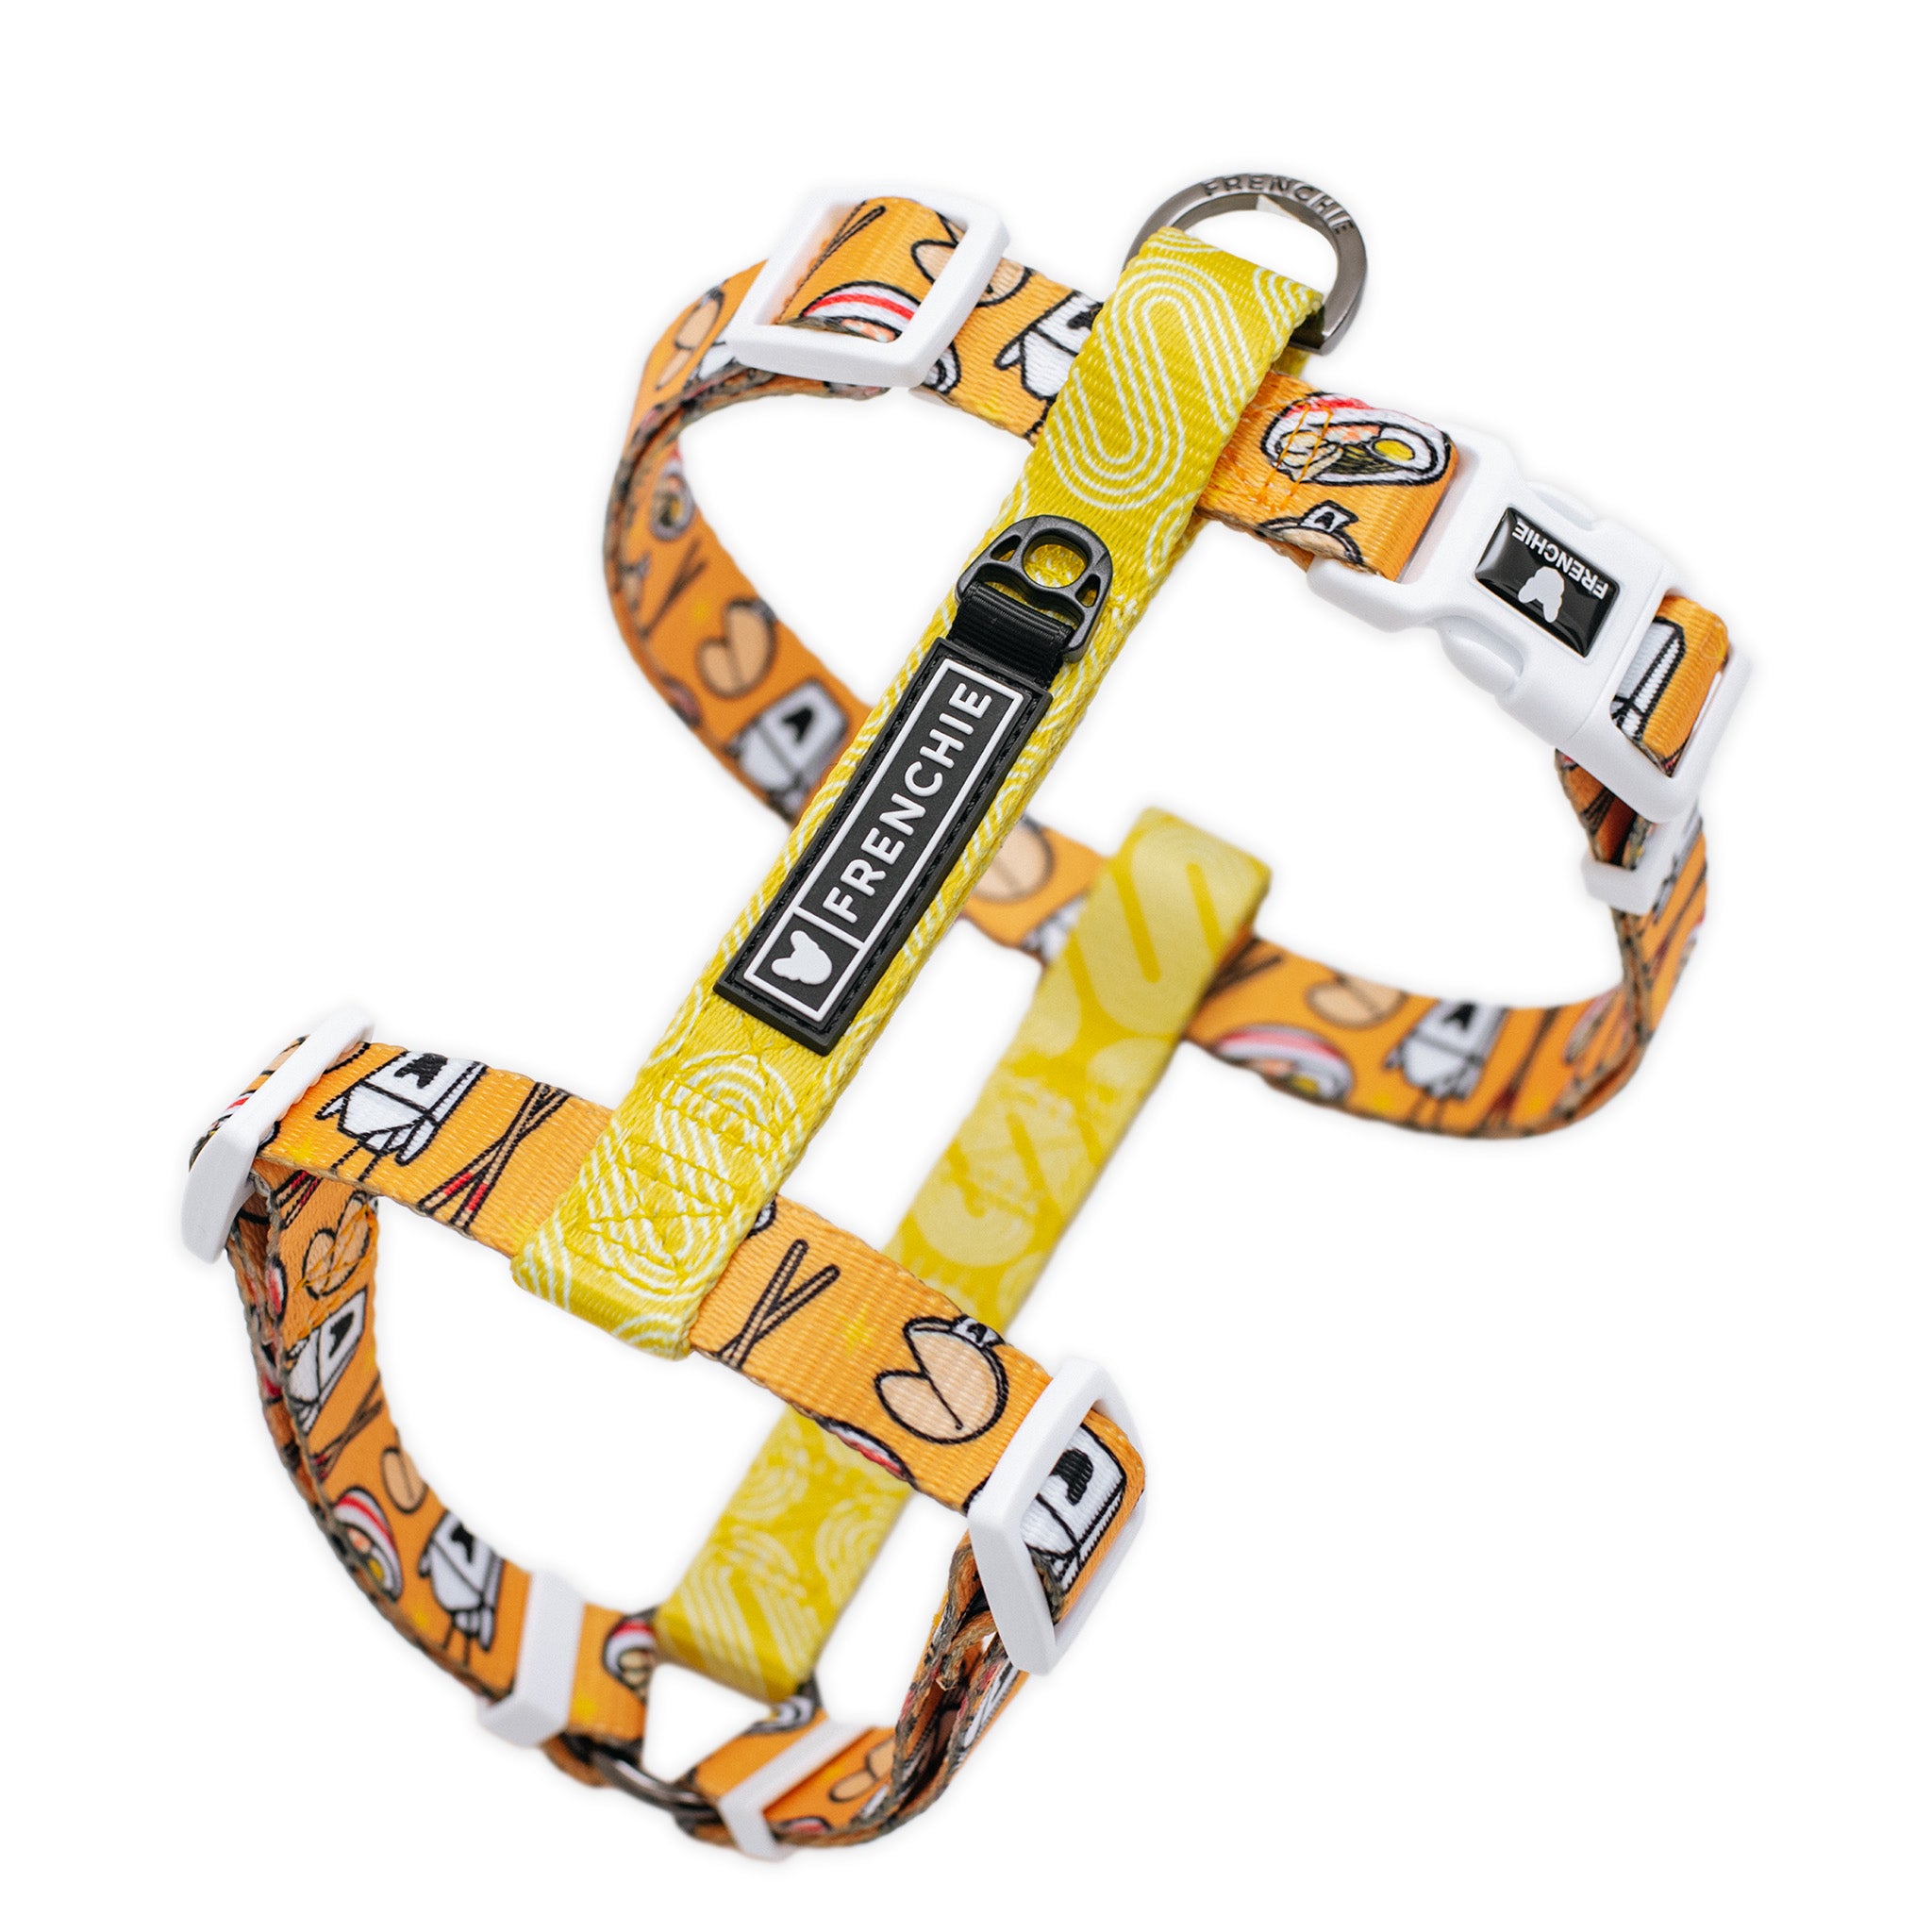 Frenchie Bulldog - (Official Site) Harnesses, Leashes & More